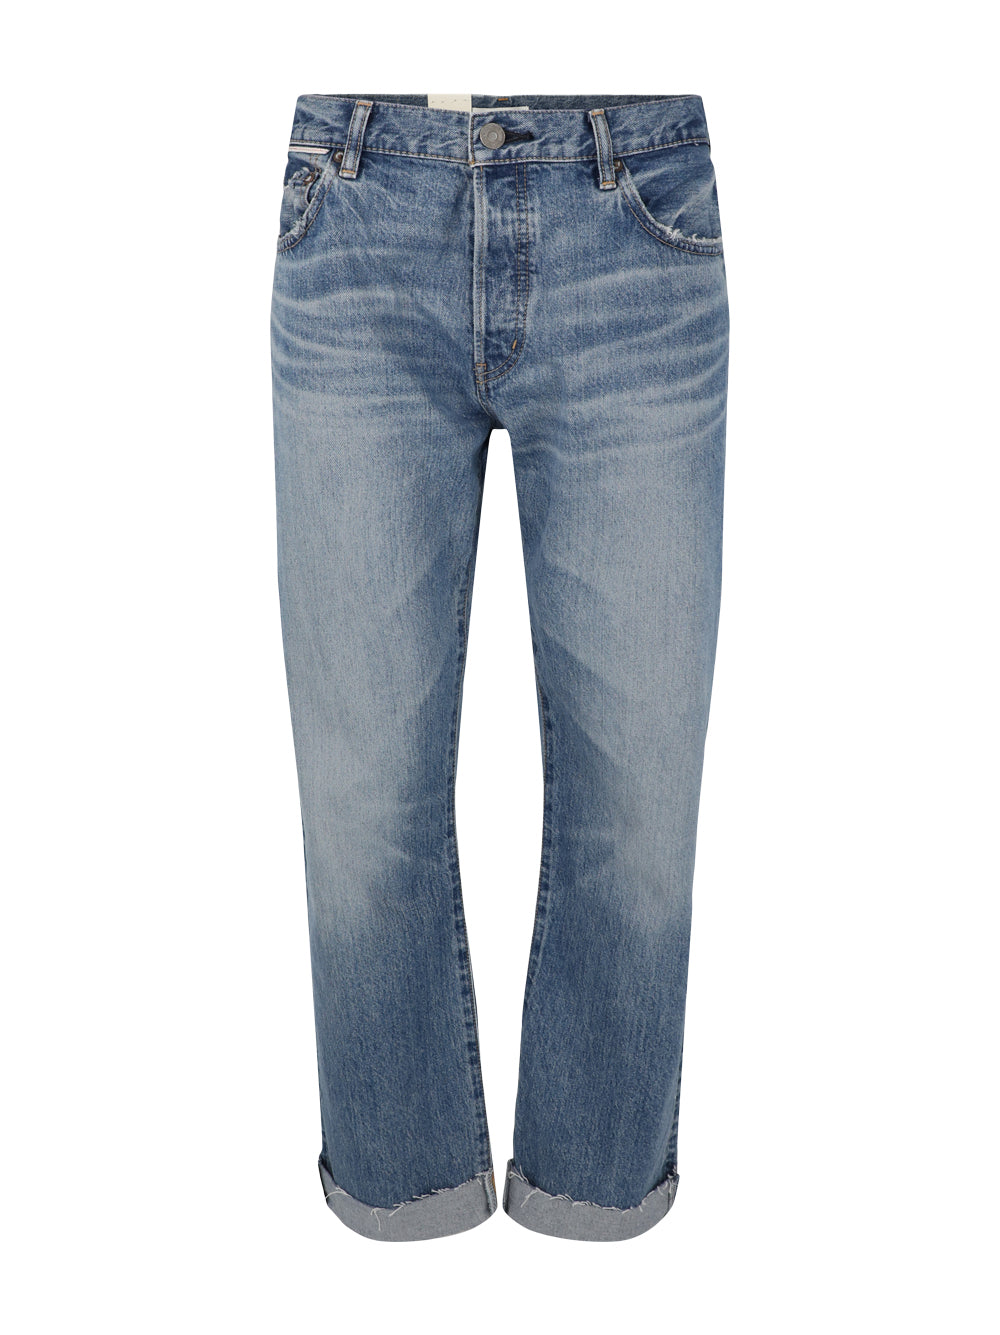 Moussy Vintage Seagraves Straight Jean in Light Blue